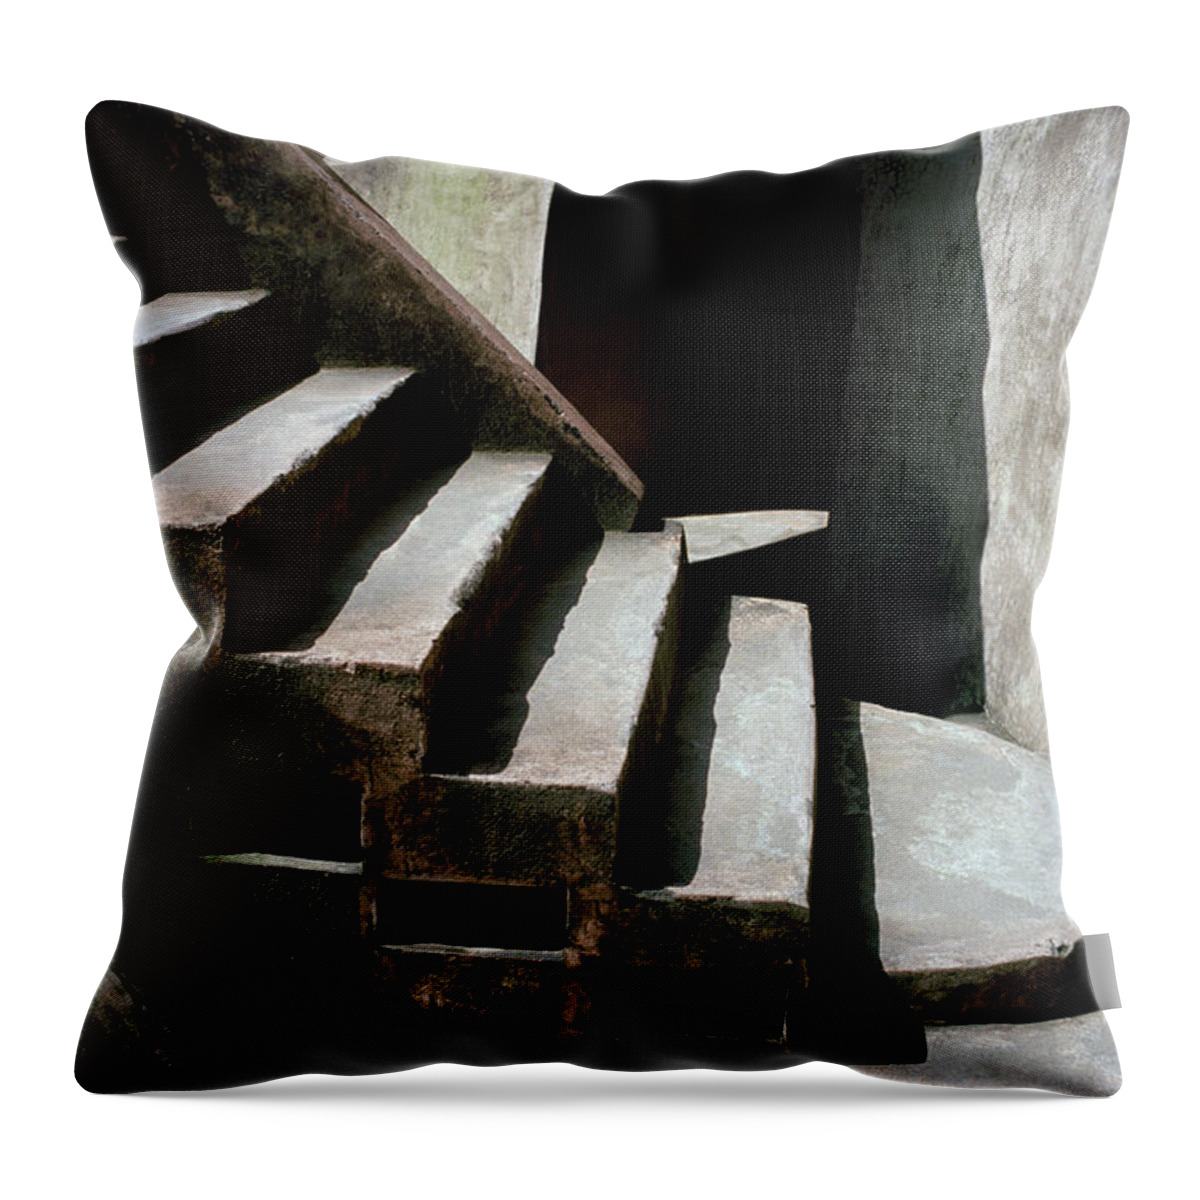 Chiaroscuro Throw Pillow featuring the photograph The Ancient Stair Of Mystery by Shaun Higson